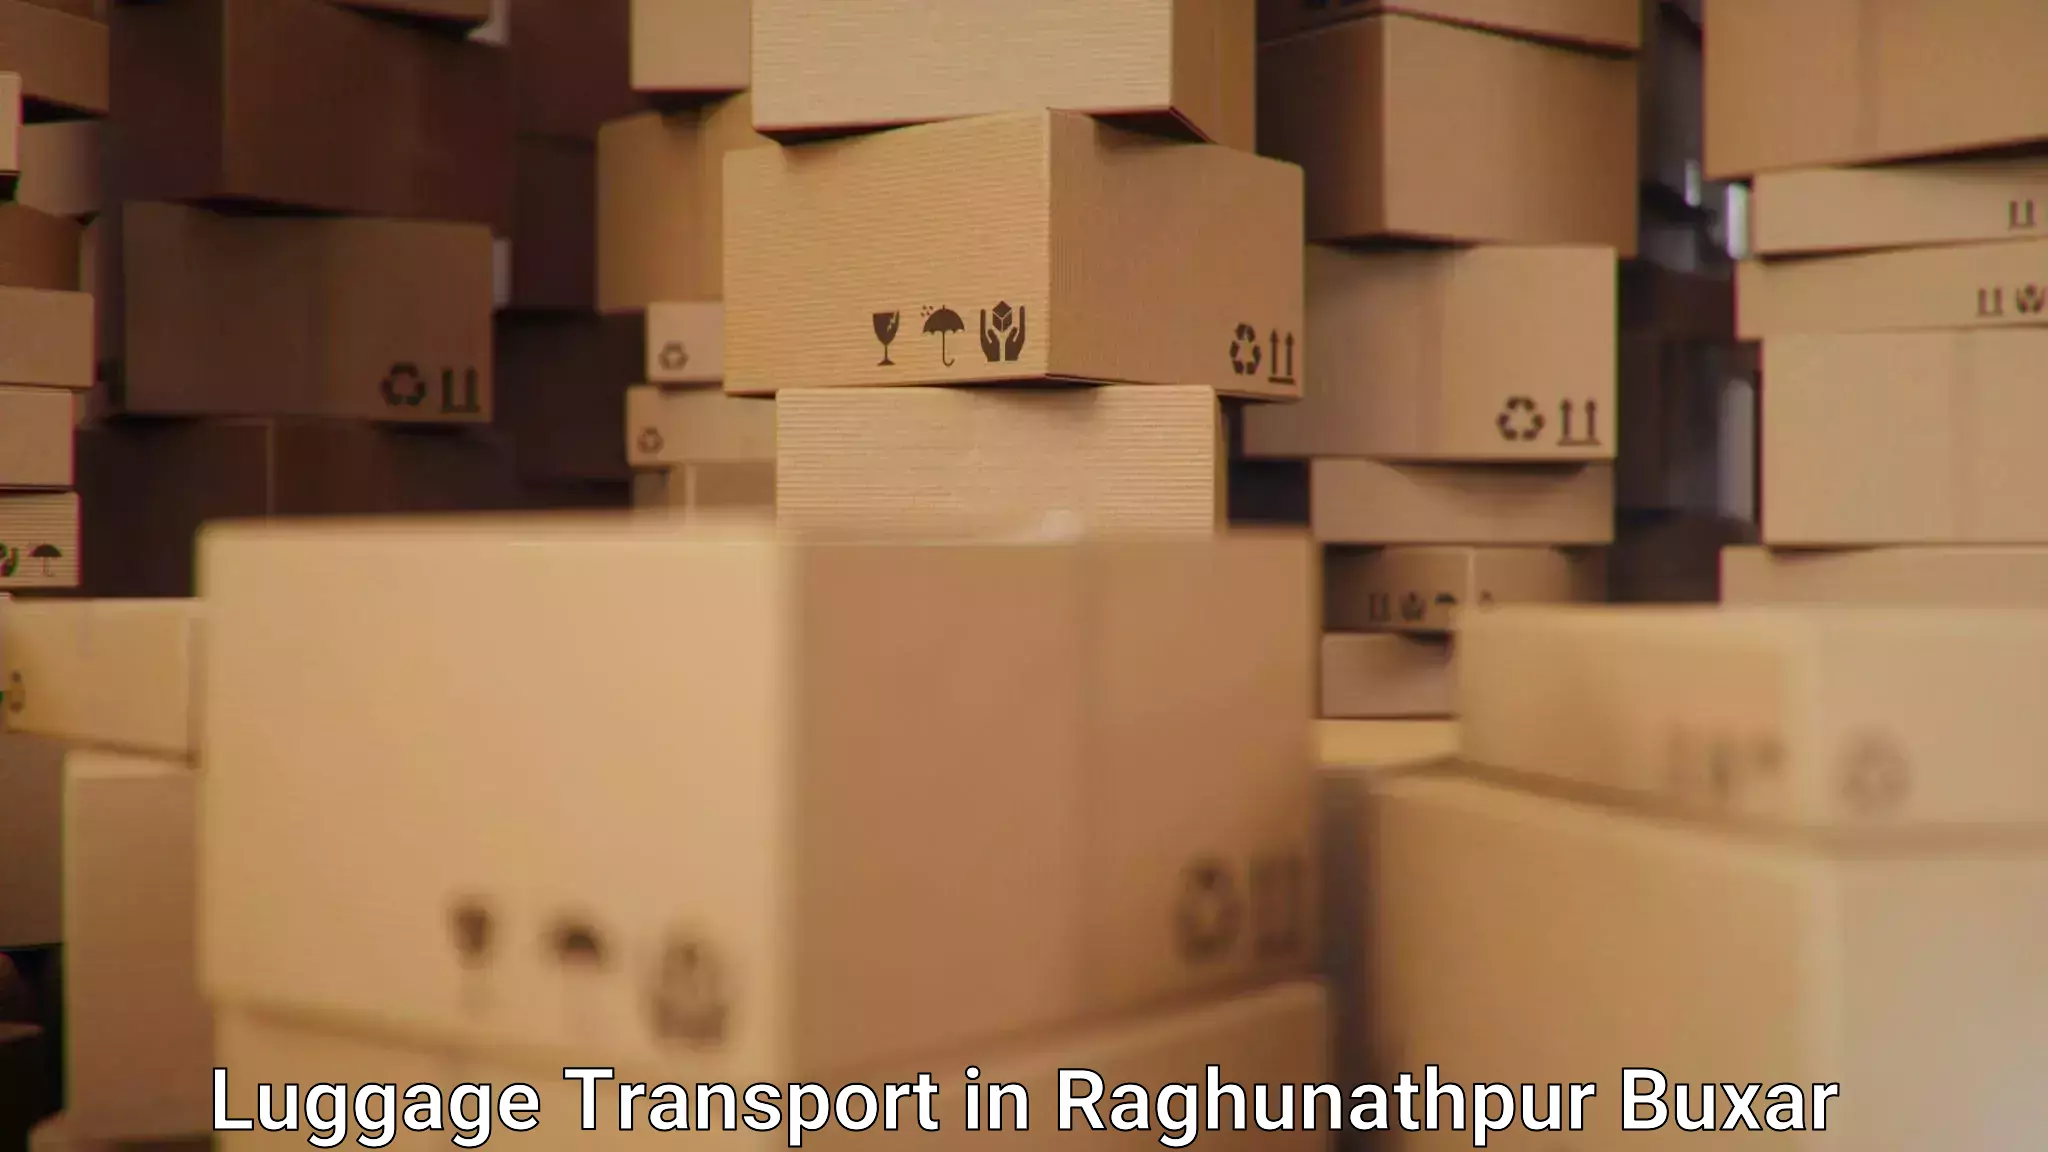 Personal luggage delivery in Raghunathpur Buxar